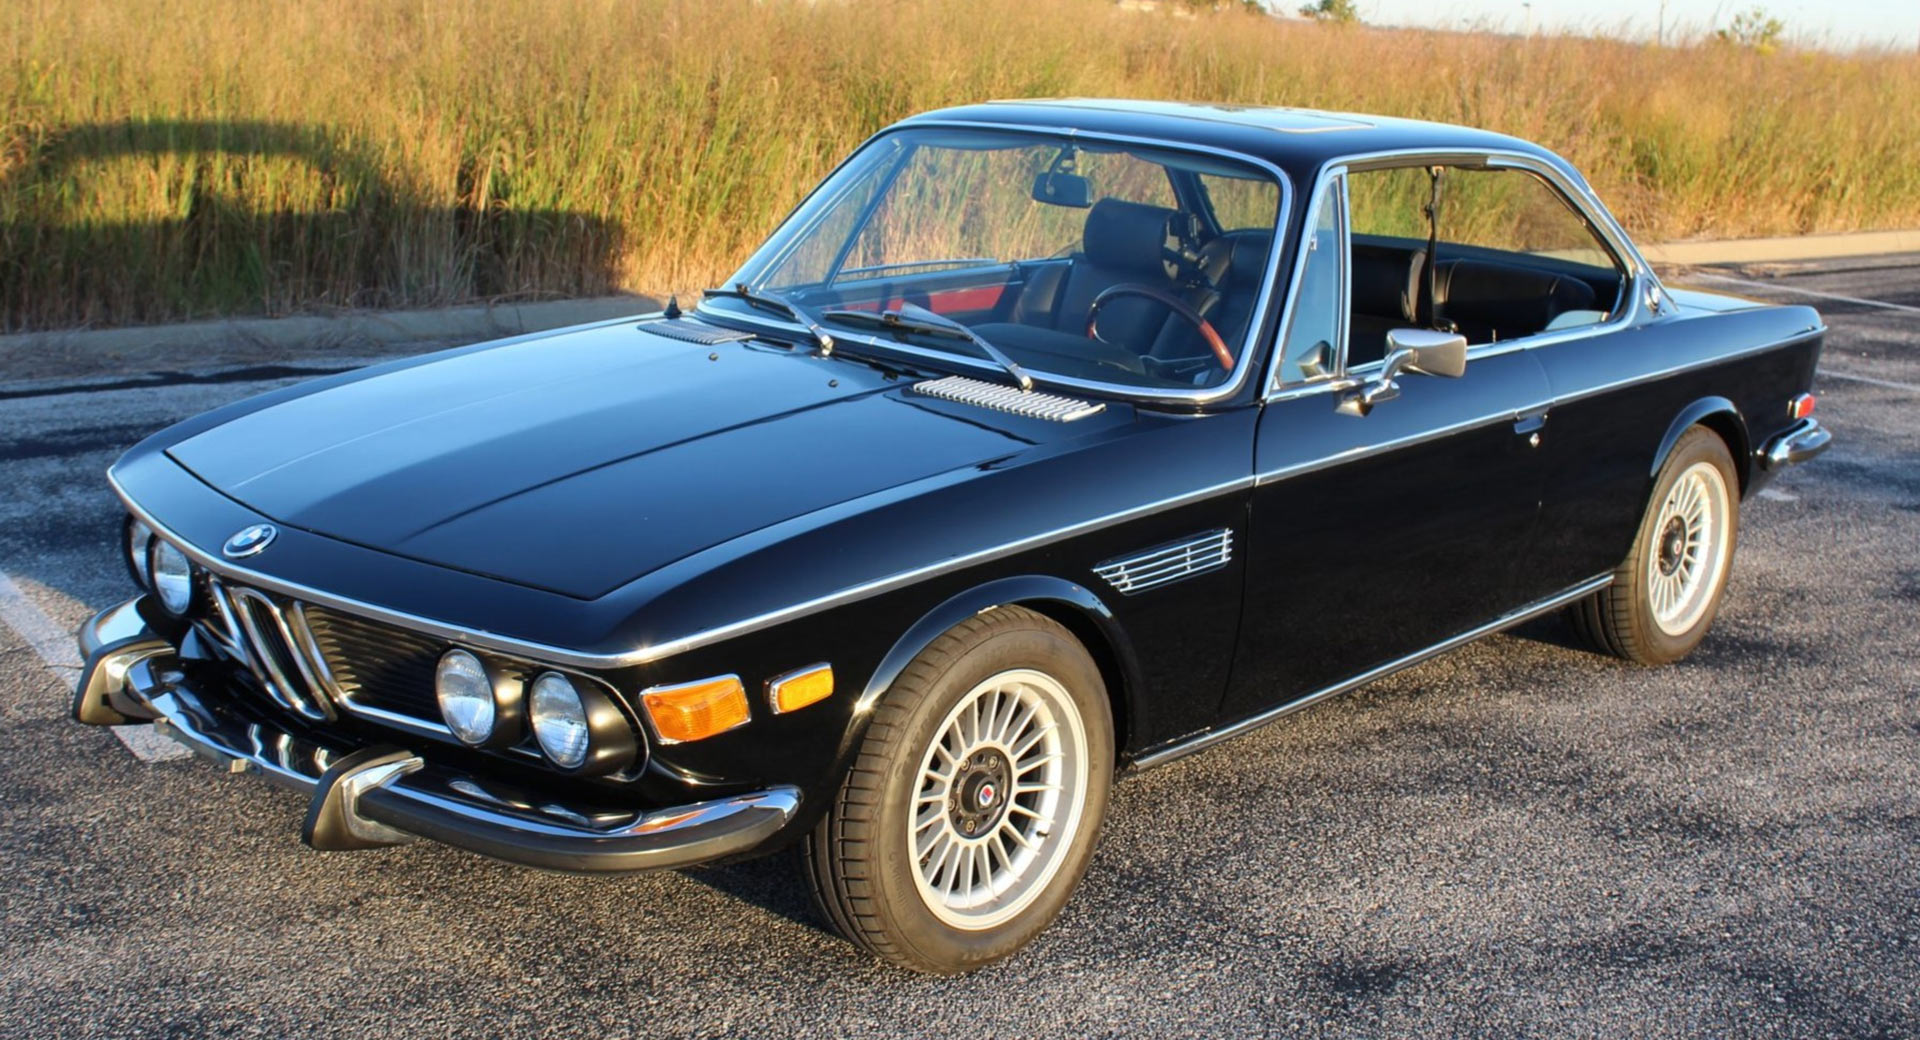 1973 BMW 3.0 CS With 635CSi Engine Fetches 75,000 At